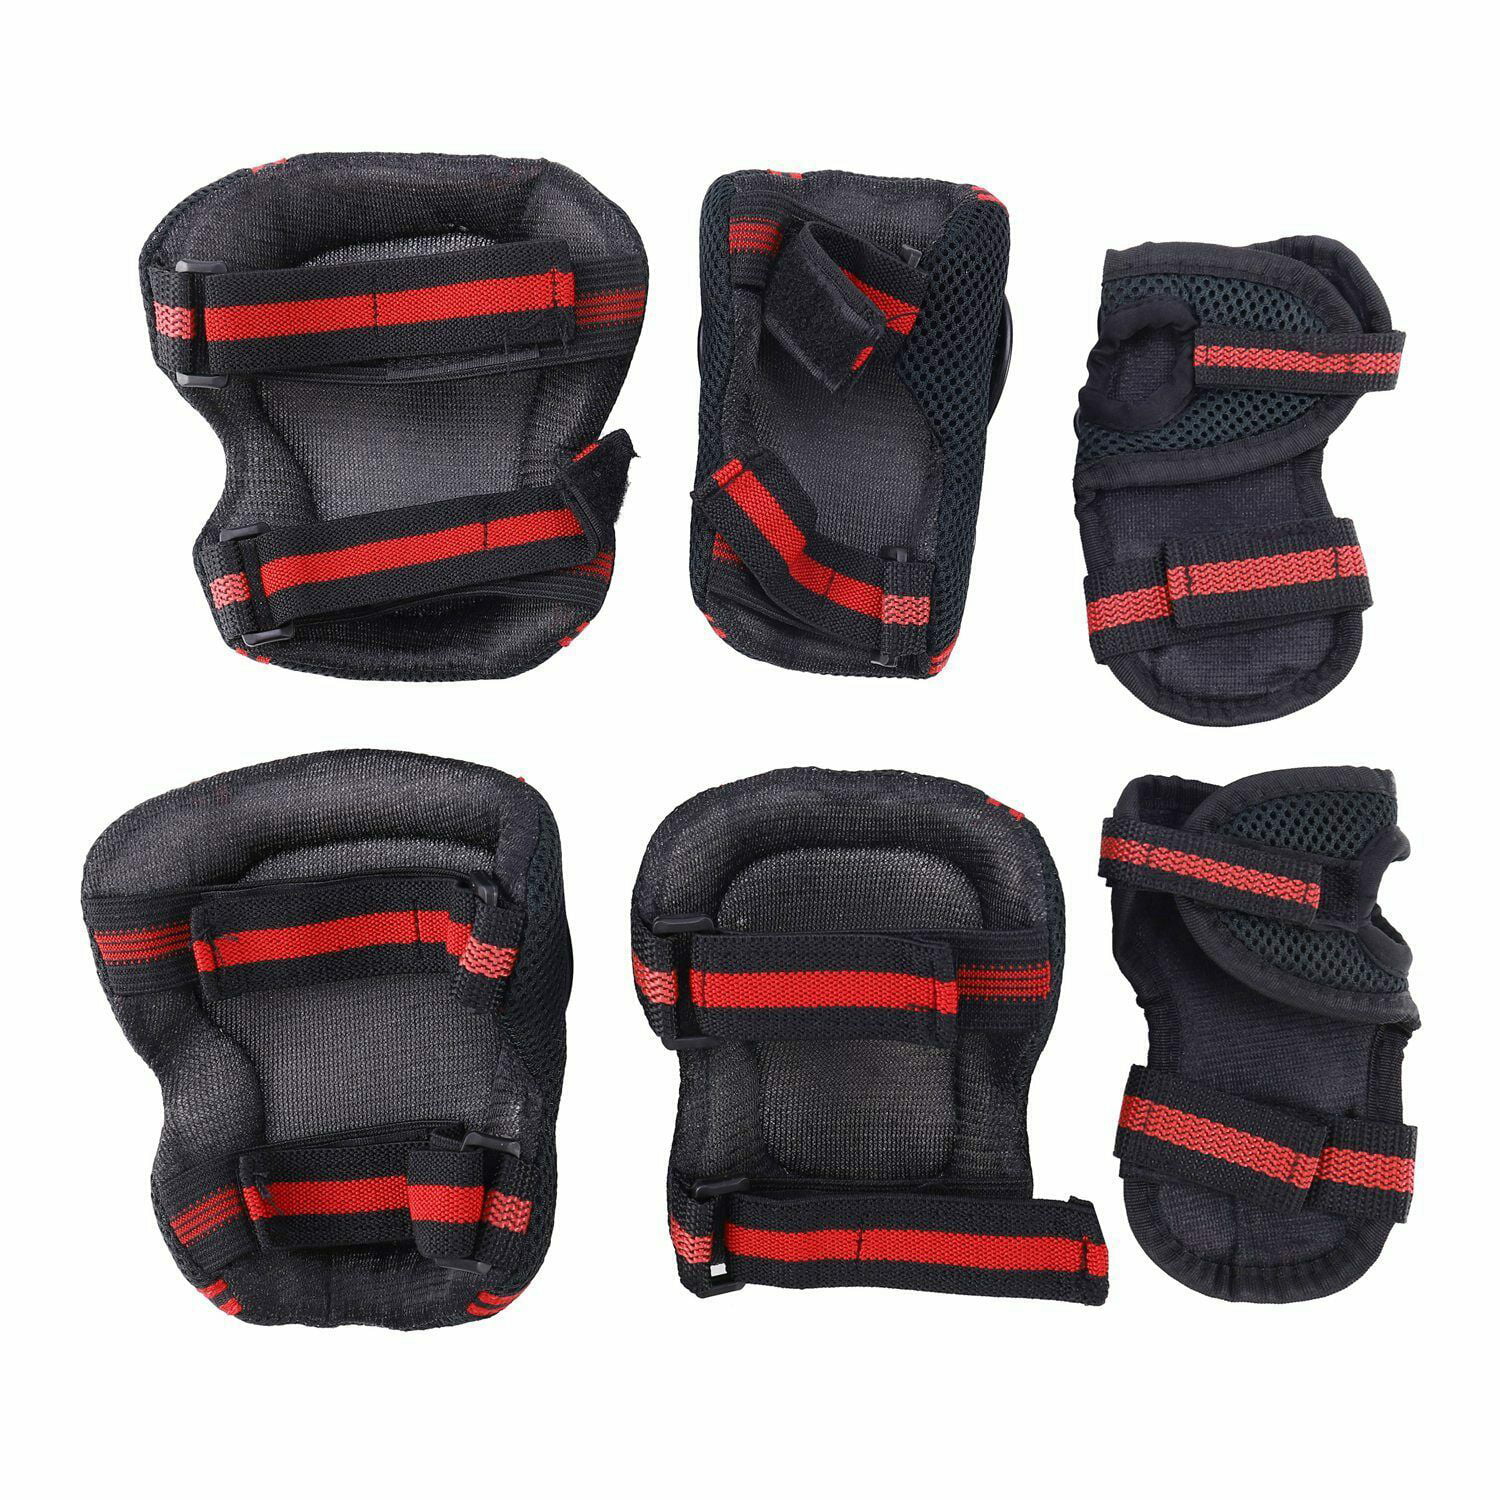 Elbow Wrist Knee Pads Sport Safety Protective Gear Guard for Kids Adult Skate 